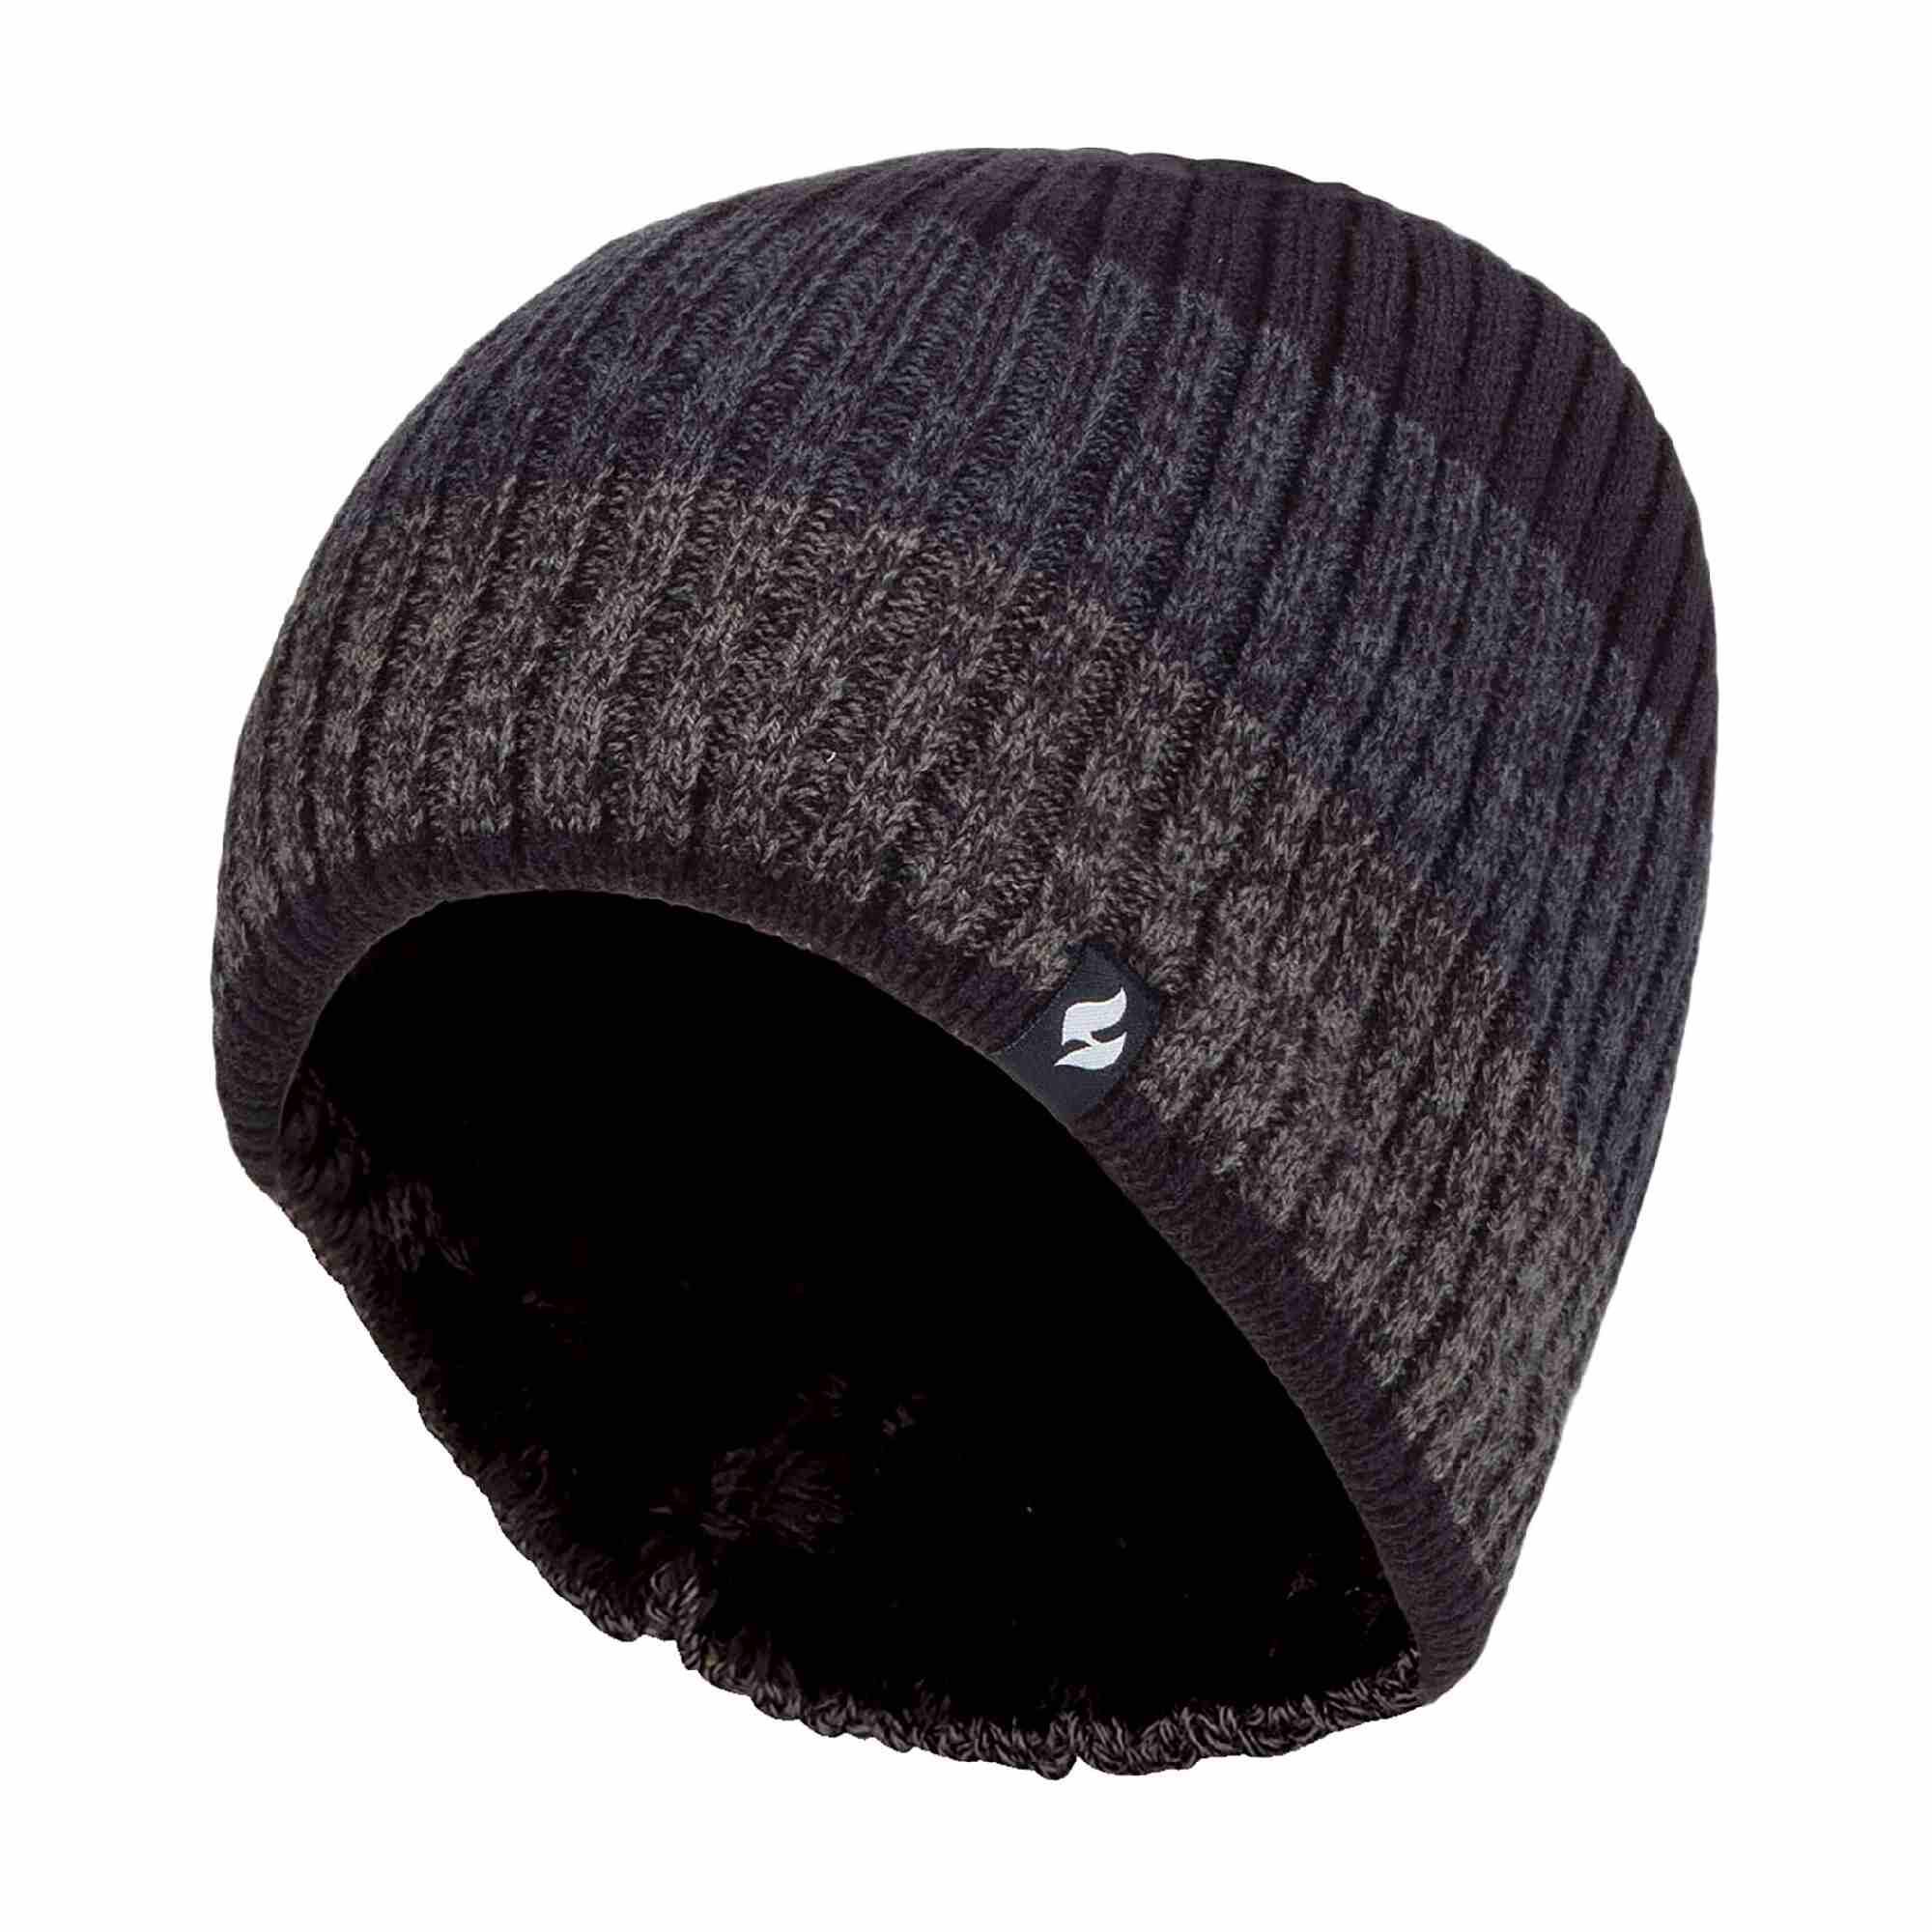 HEAT HOLDERS Mens Fleece Lined Striped Winter High Performance Soft Insulated Thermal Beanie